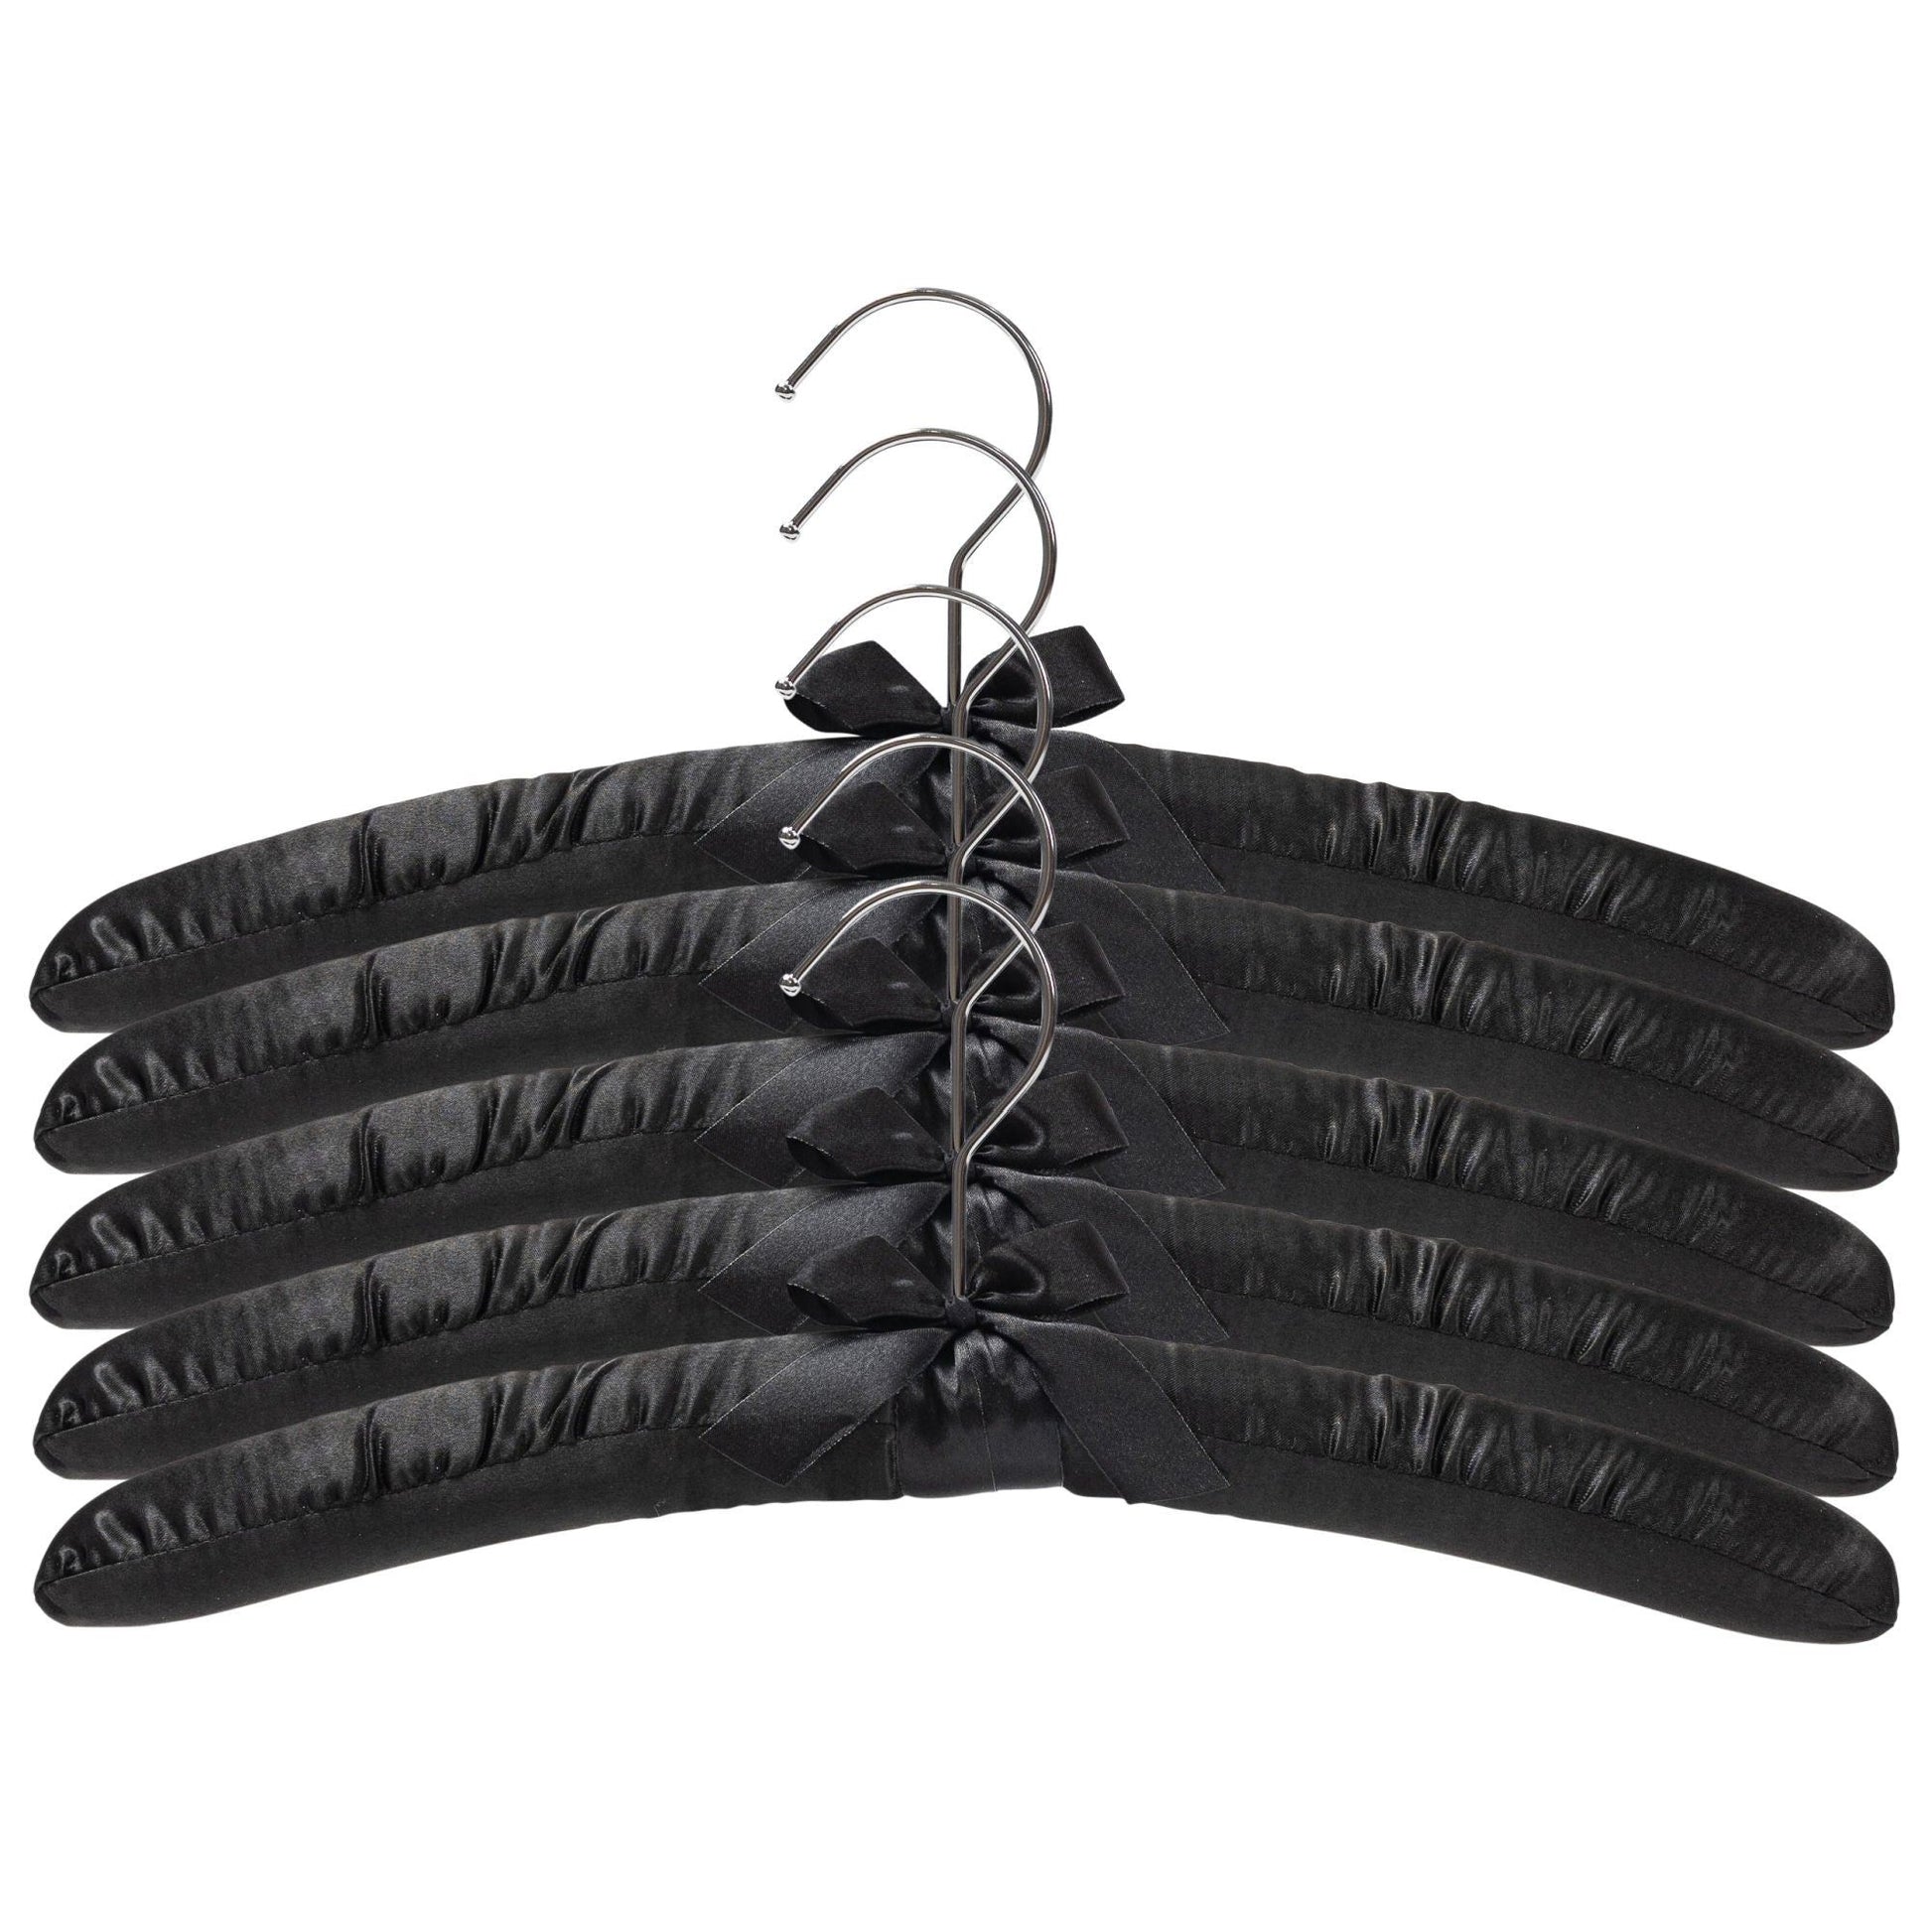 Padded coat hangers With Chrome Hook - Black Satin - 38cm X 45mm Thick (Sold in Bundles of 20/50) - Hangersforless